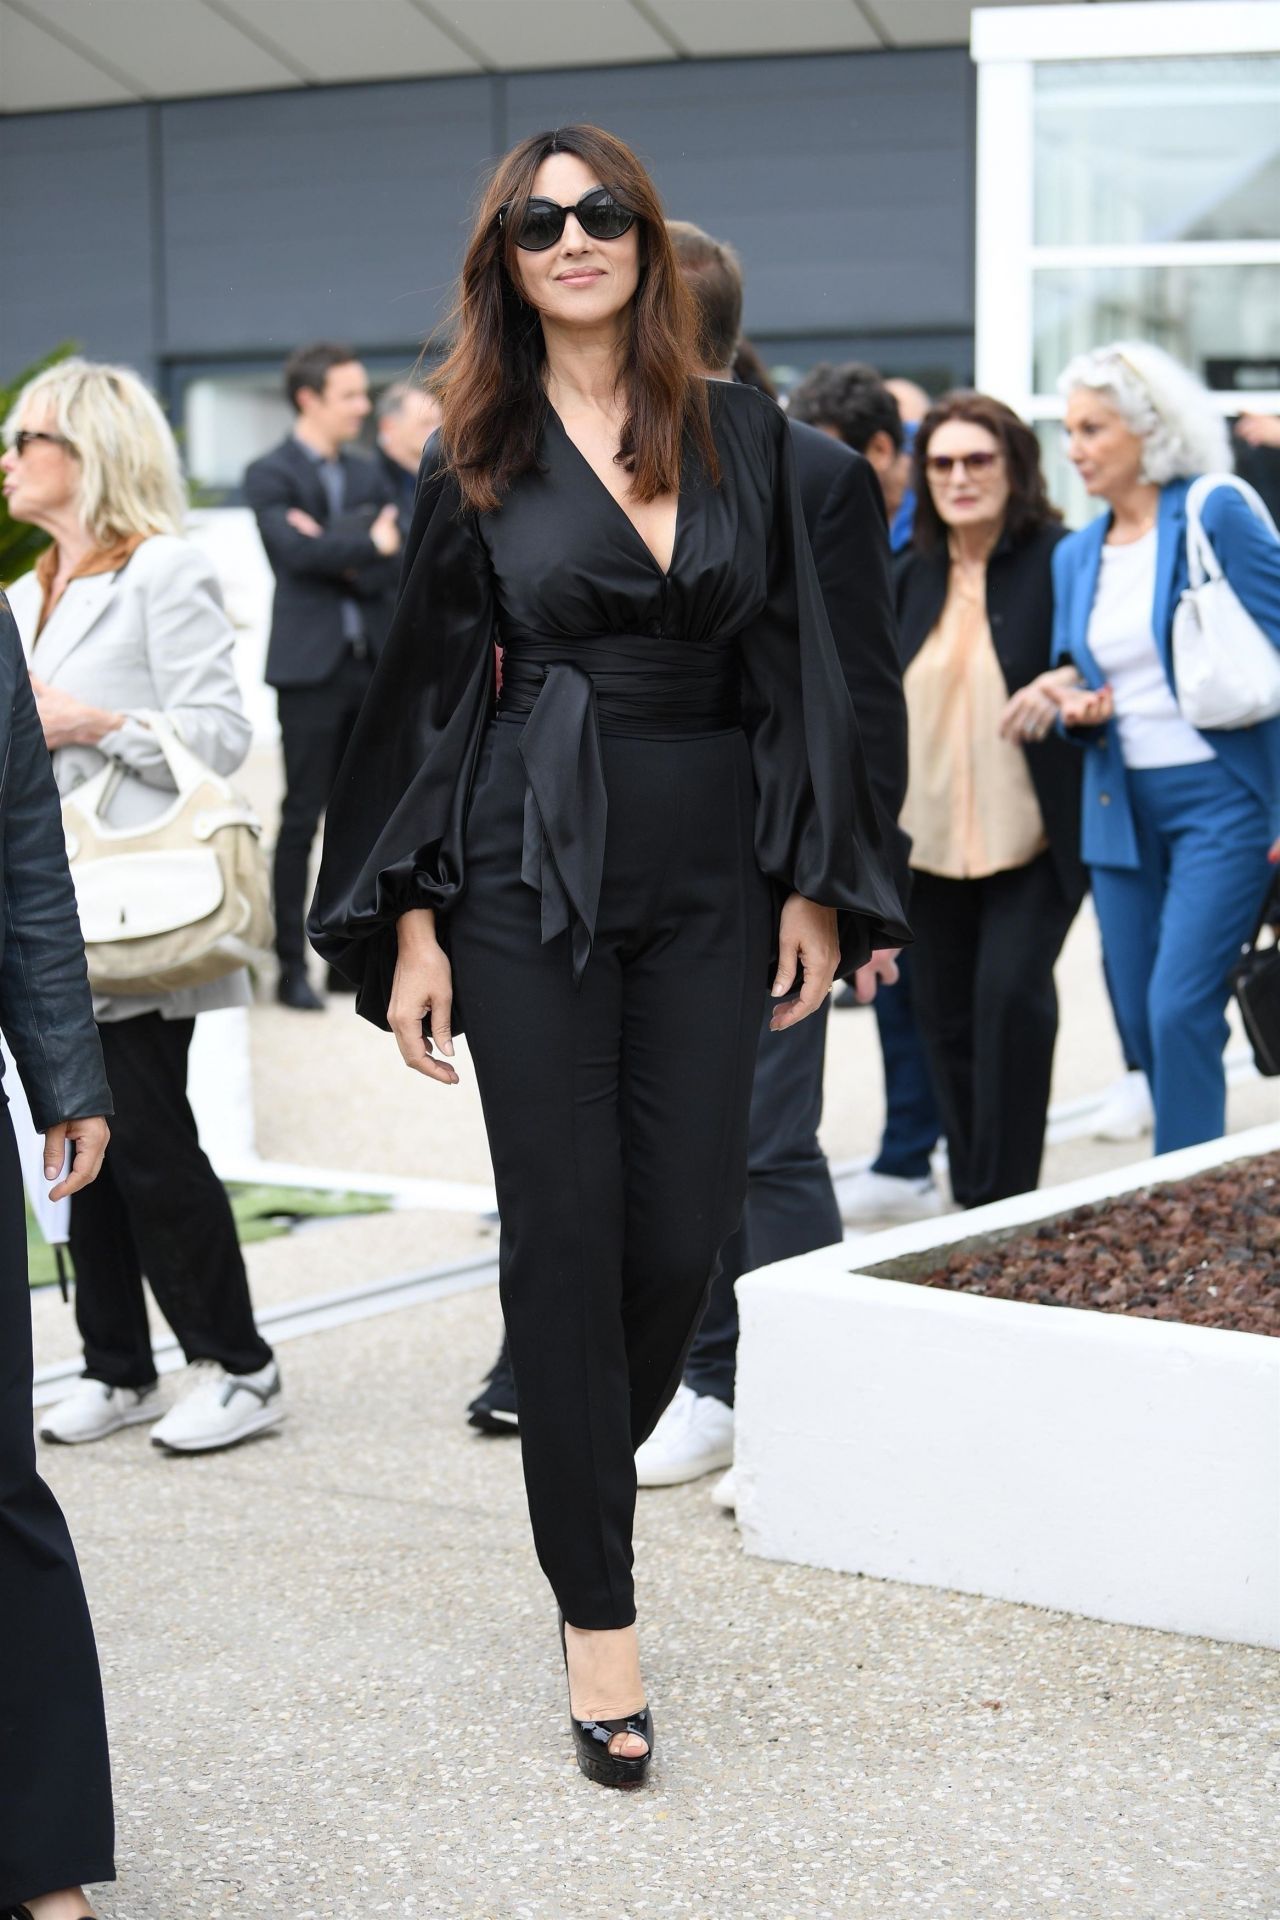 monica-bellucci-the-best-years-of-a-life-photocall-at-cannes-film-festival-5.jpg